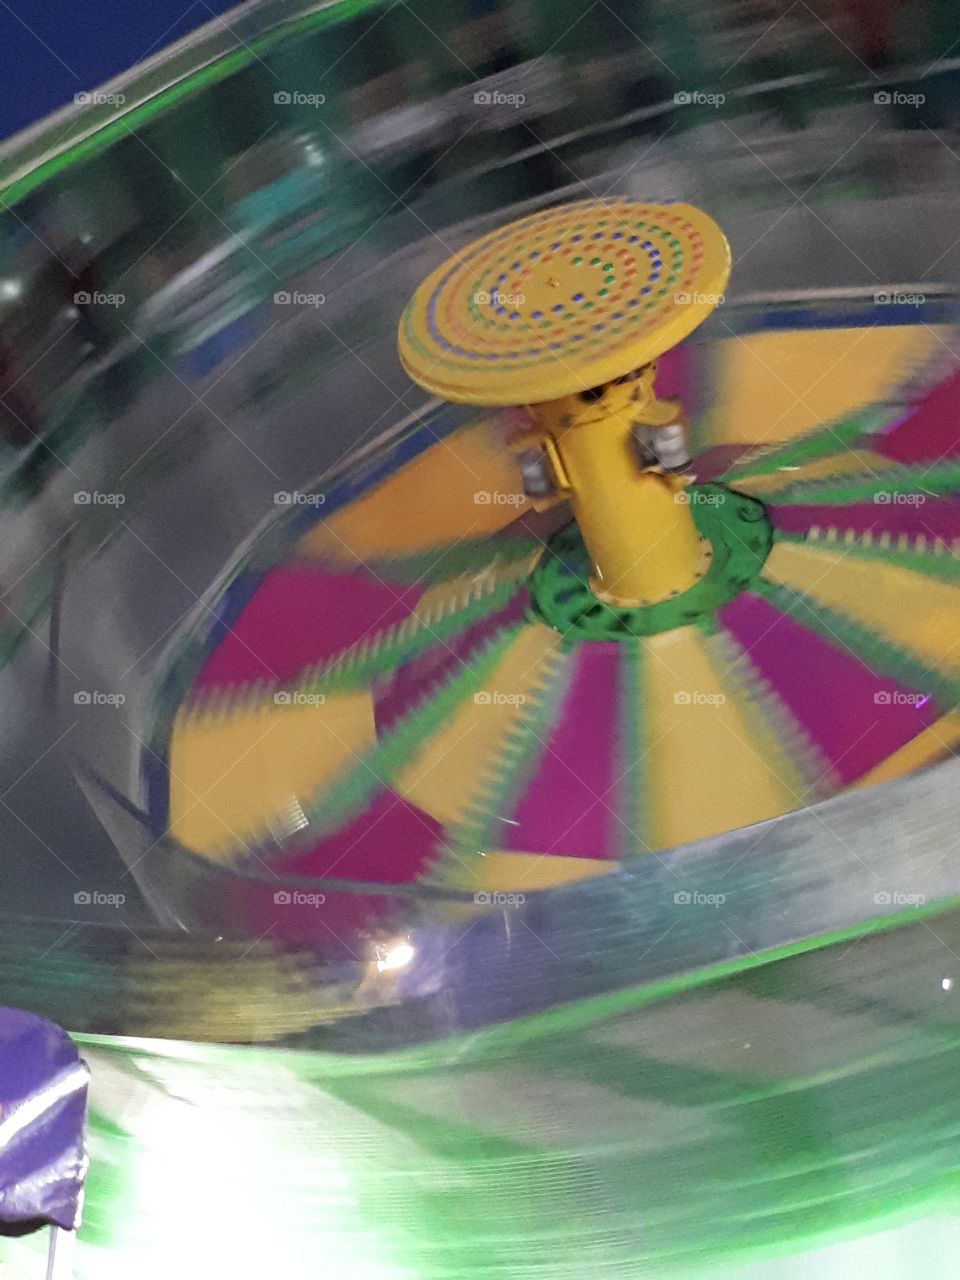 Just keep spinning around and around.
this I took at the fair last year. I was going threw a heart break and every day just felt like my head was spinning but I was standing still going no where.